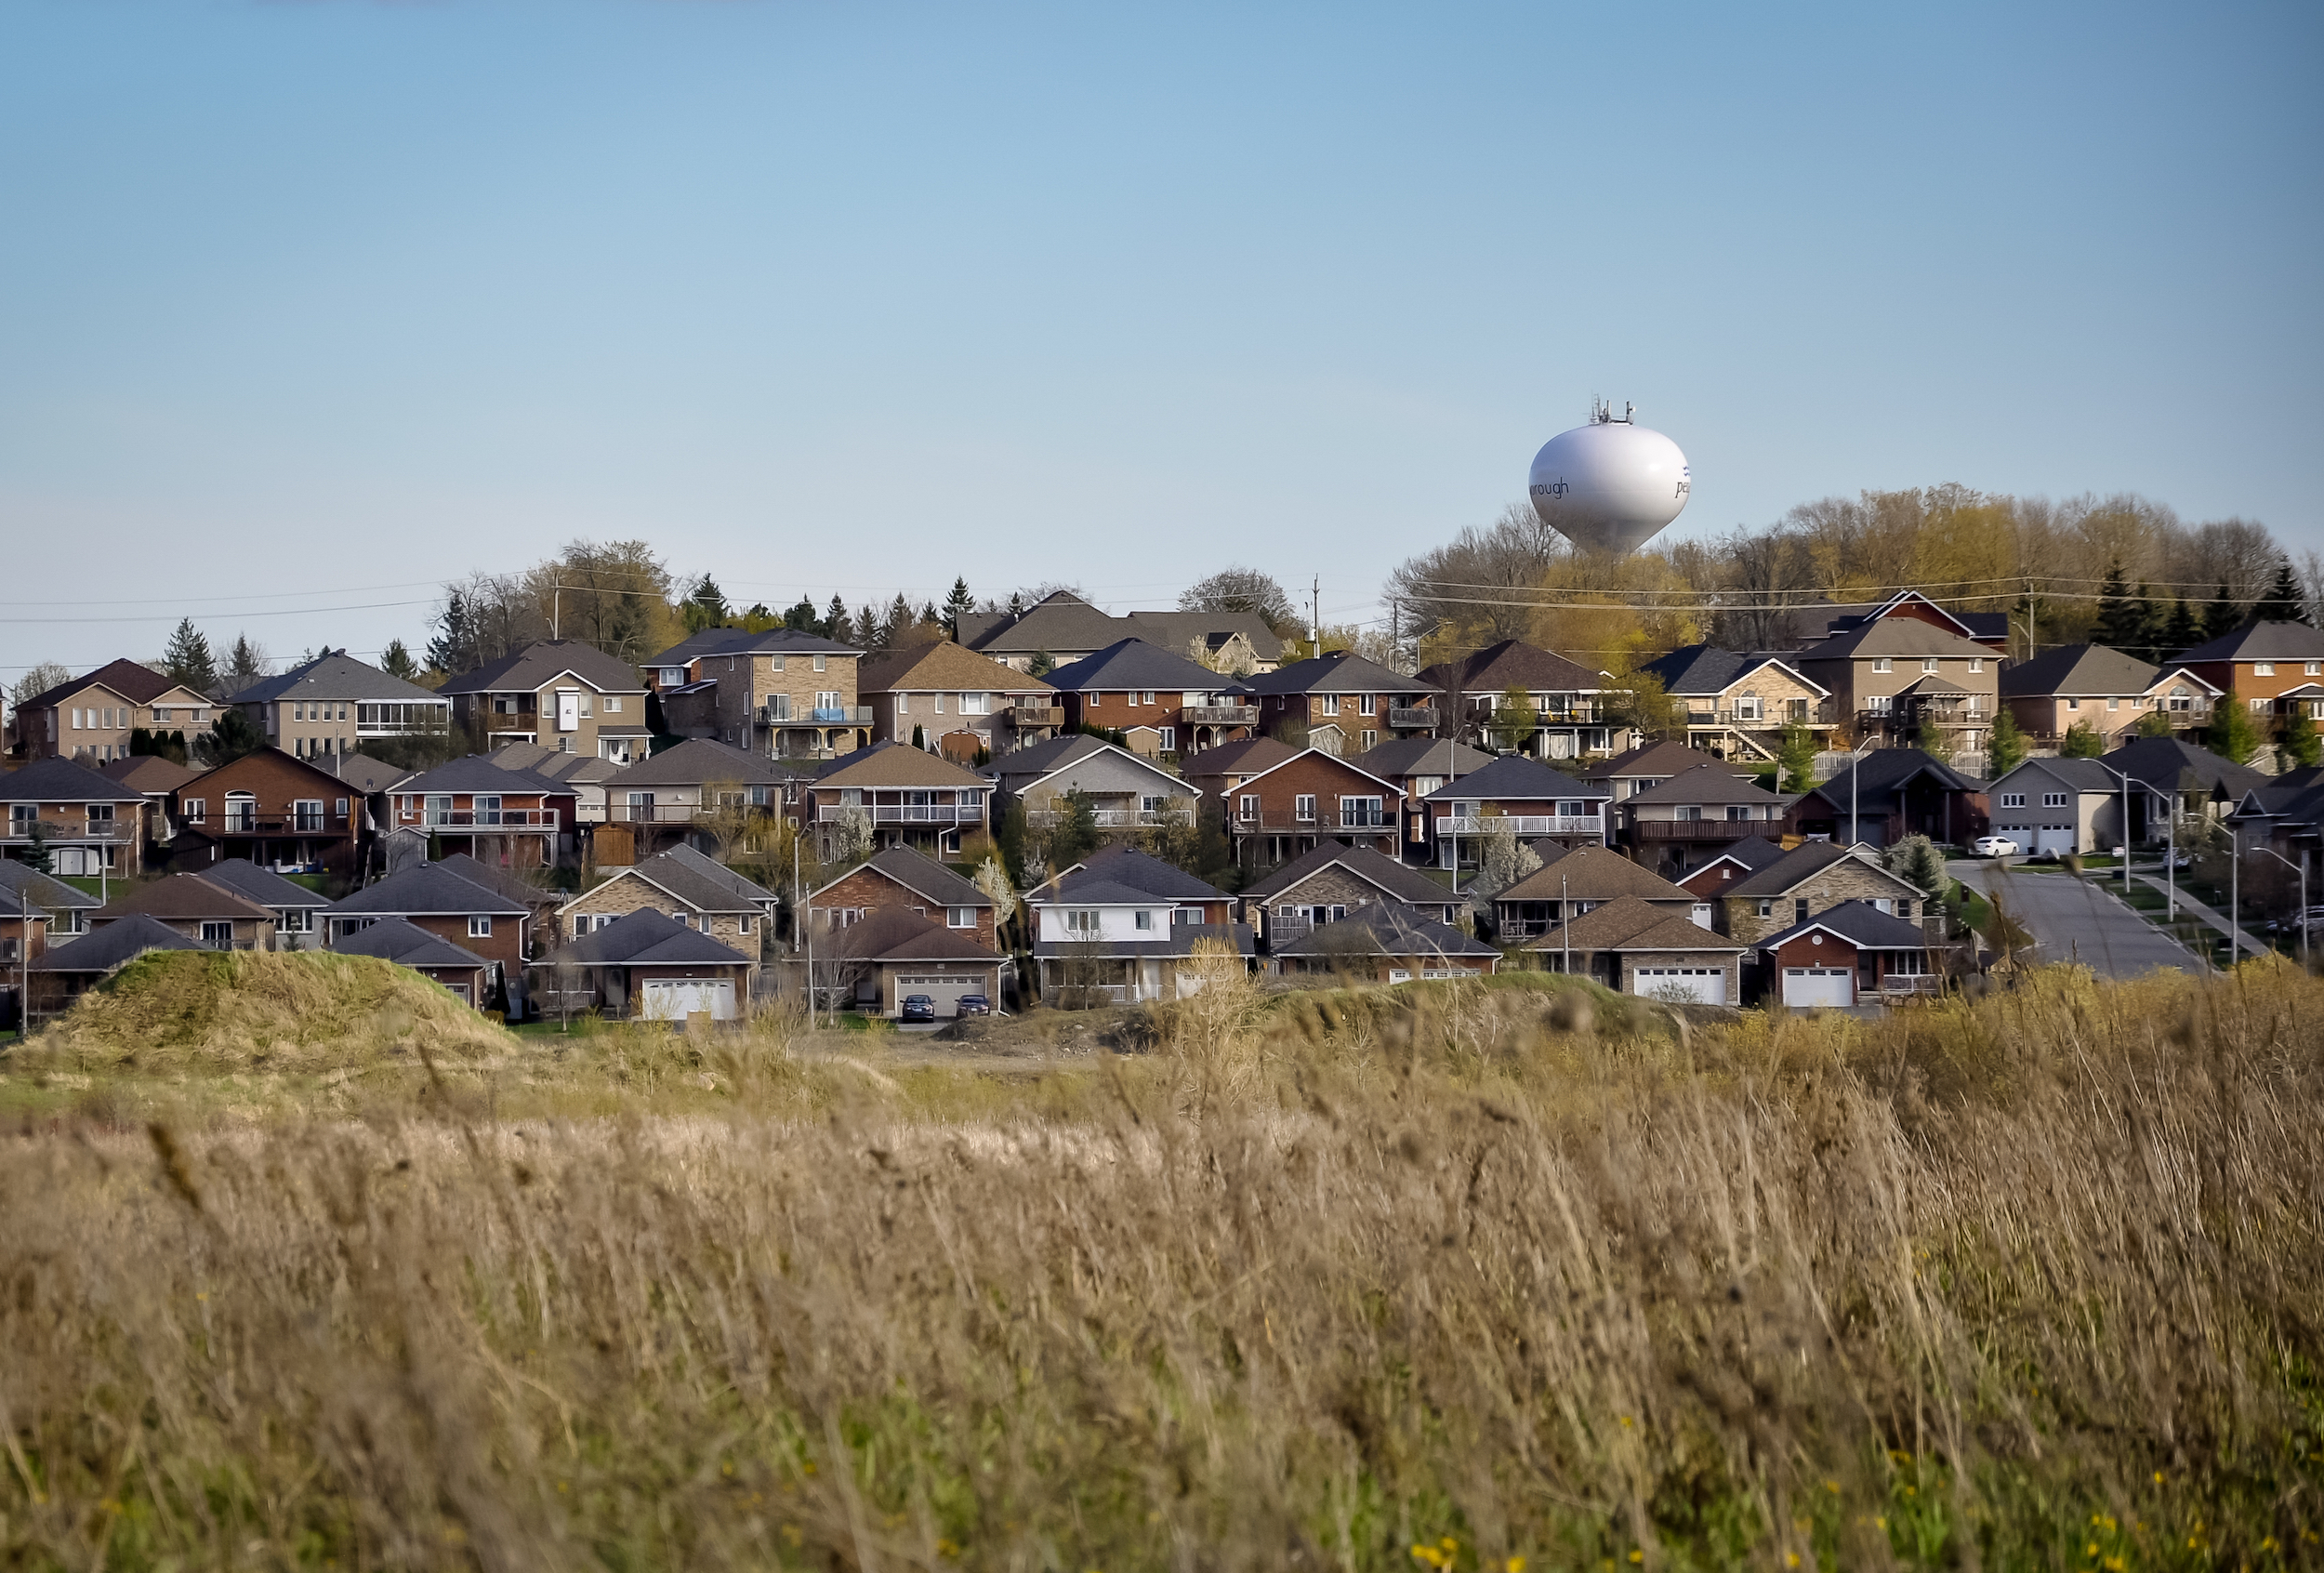 Peterborough, Ontario, Canada - May 7, 2021: View of houses and water tower in Peterborough in spring.